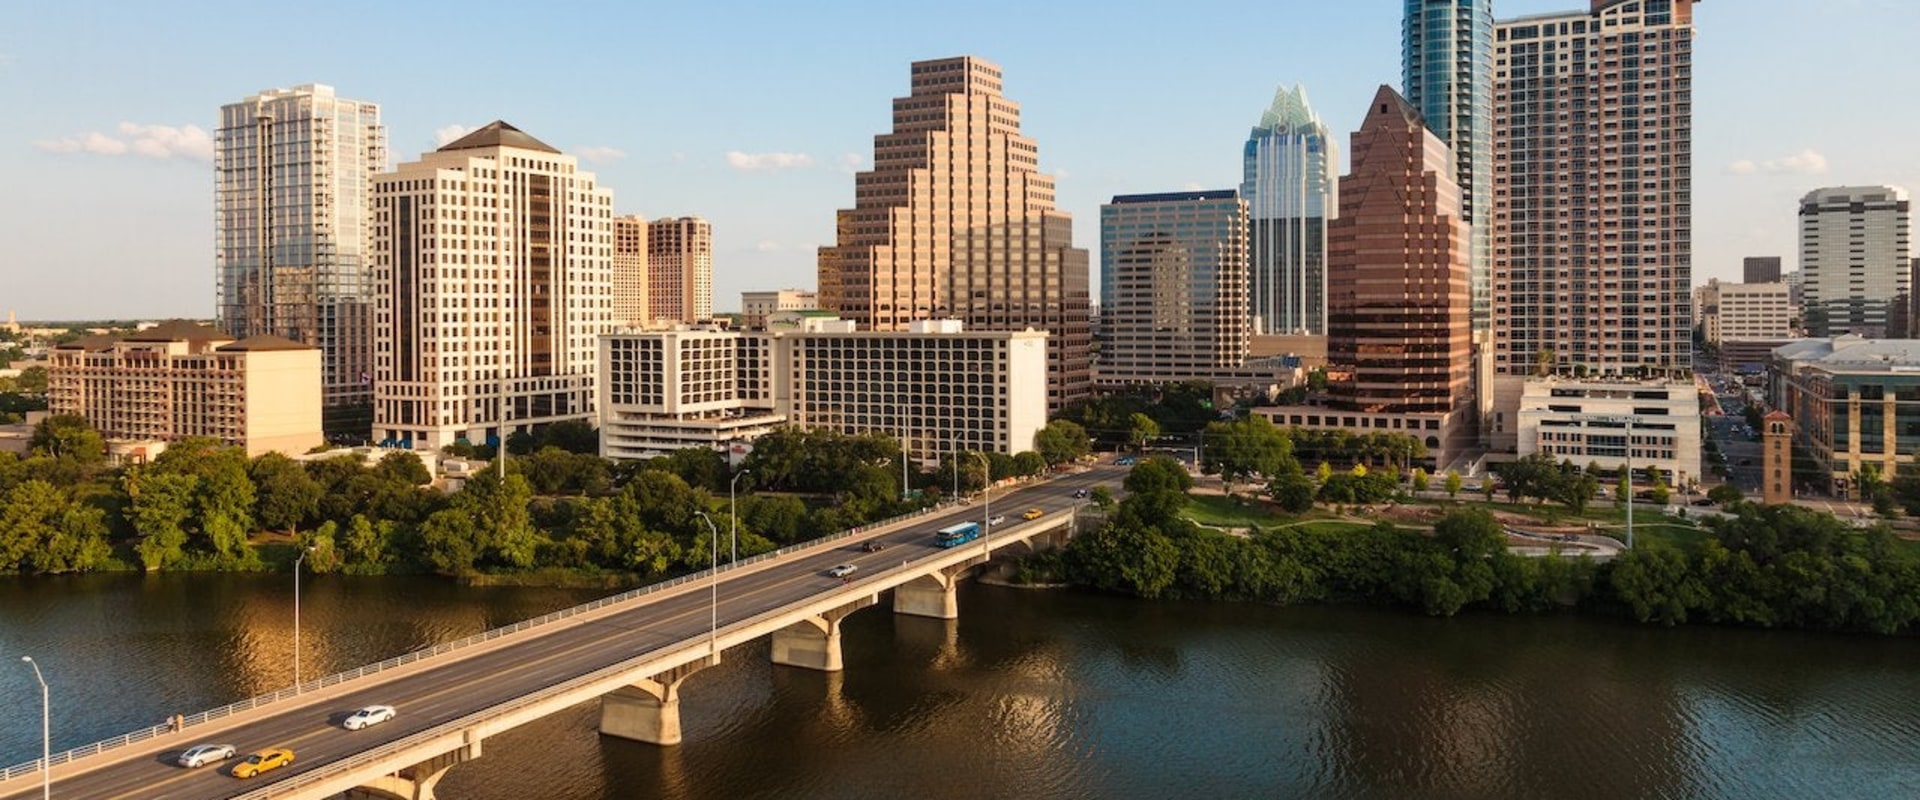 Is it affordable to live in austin tx?